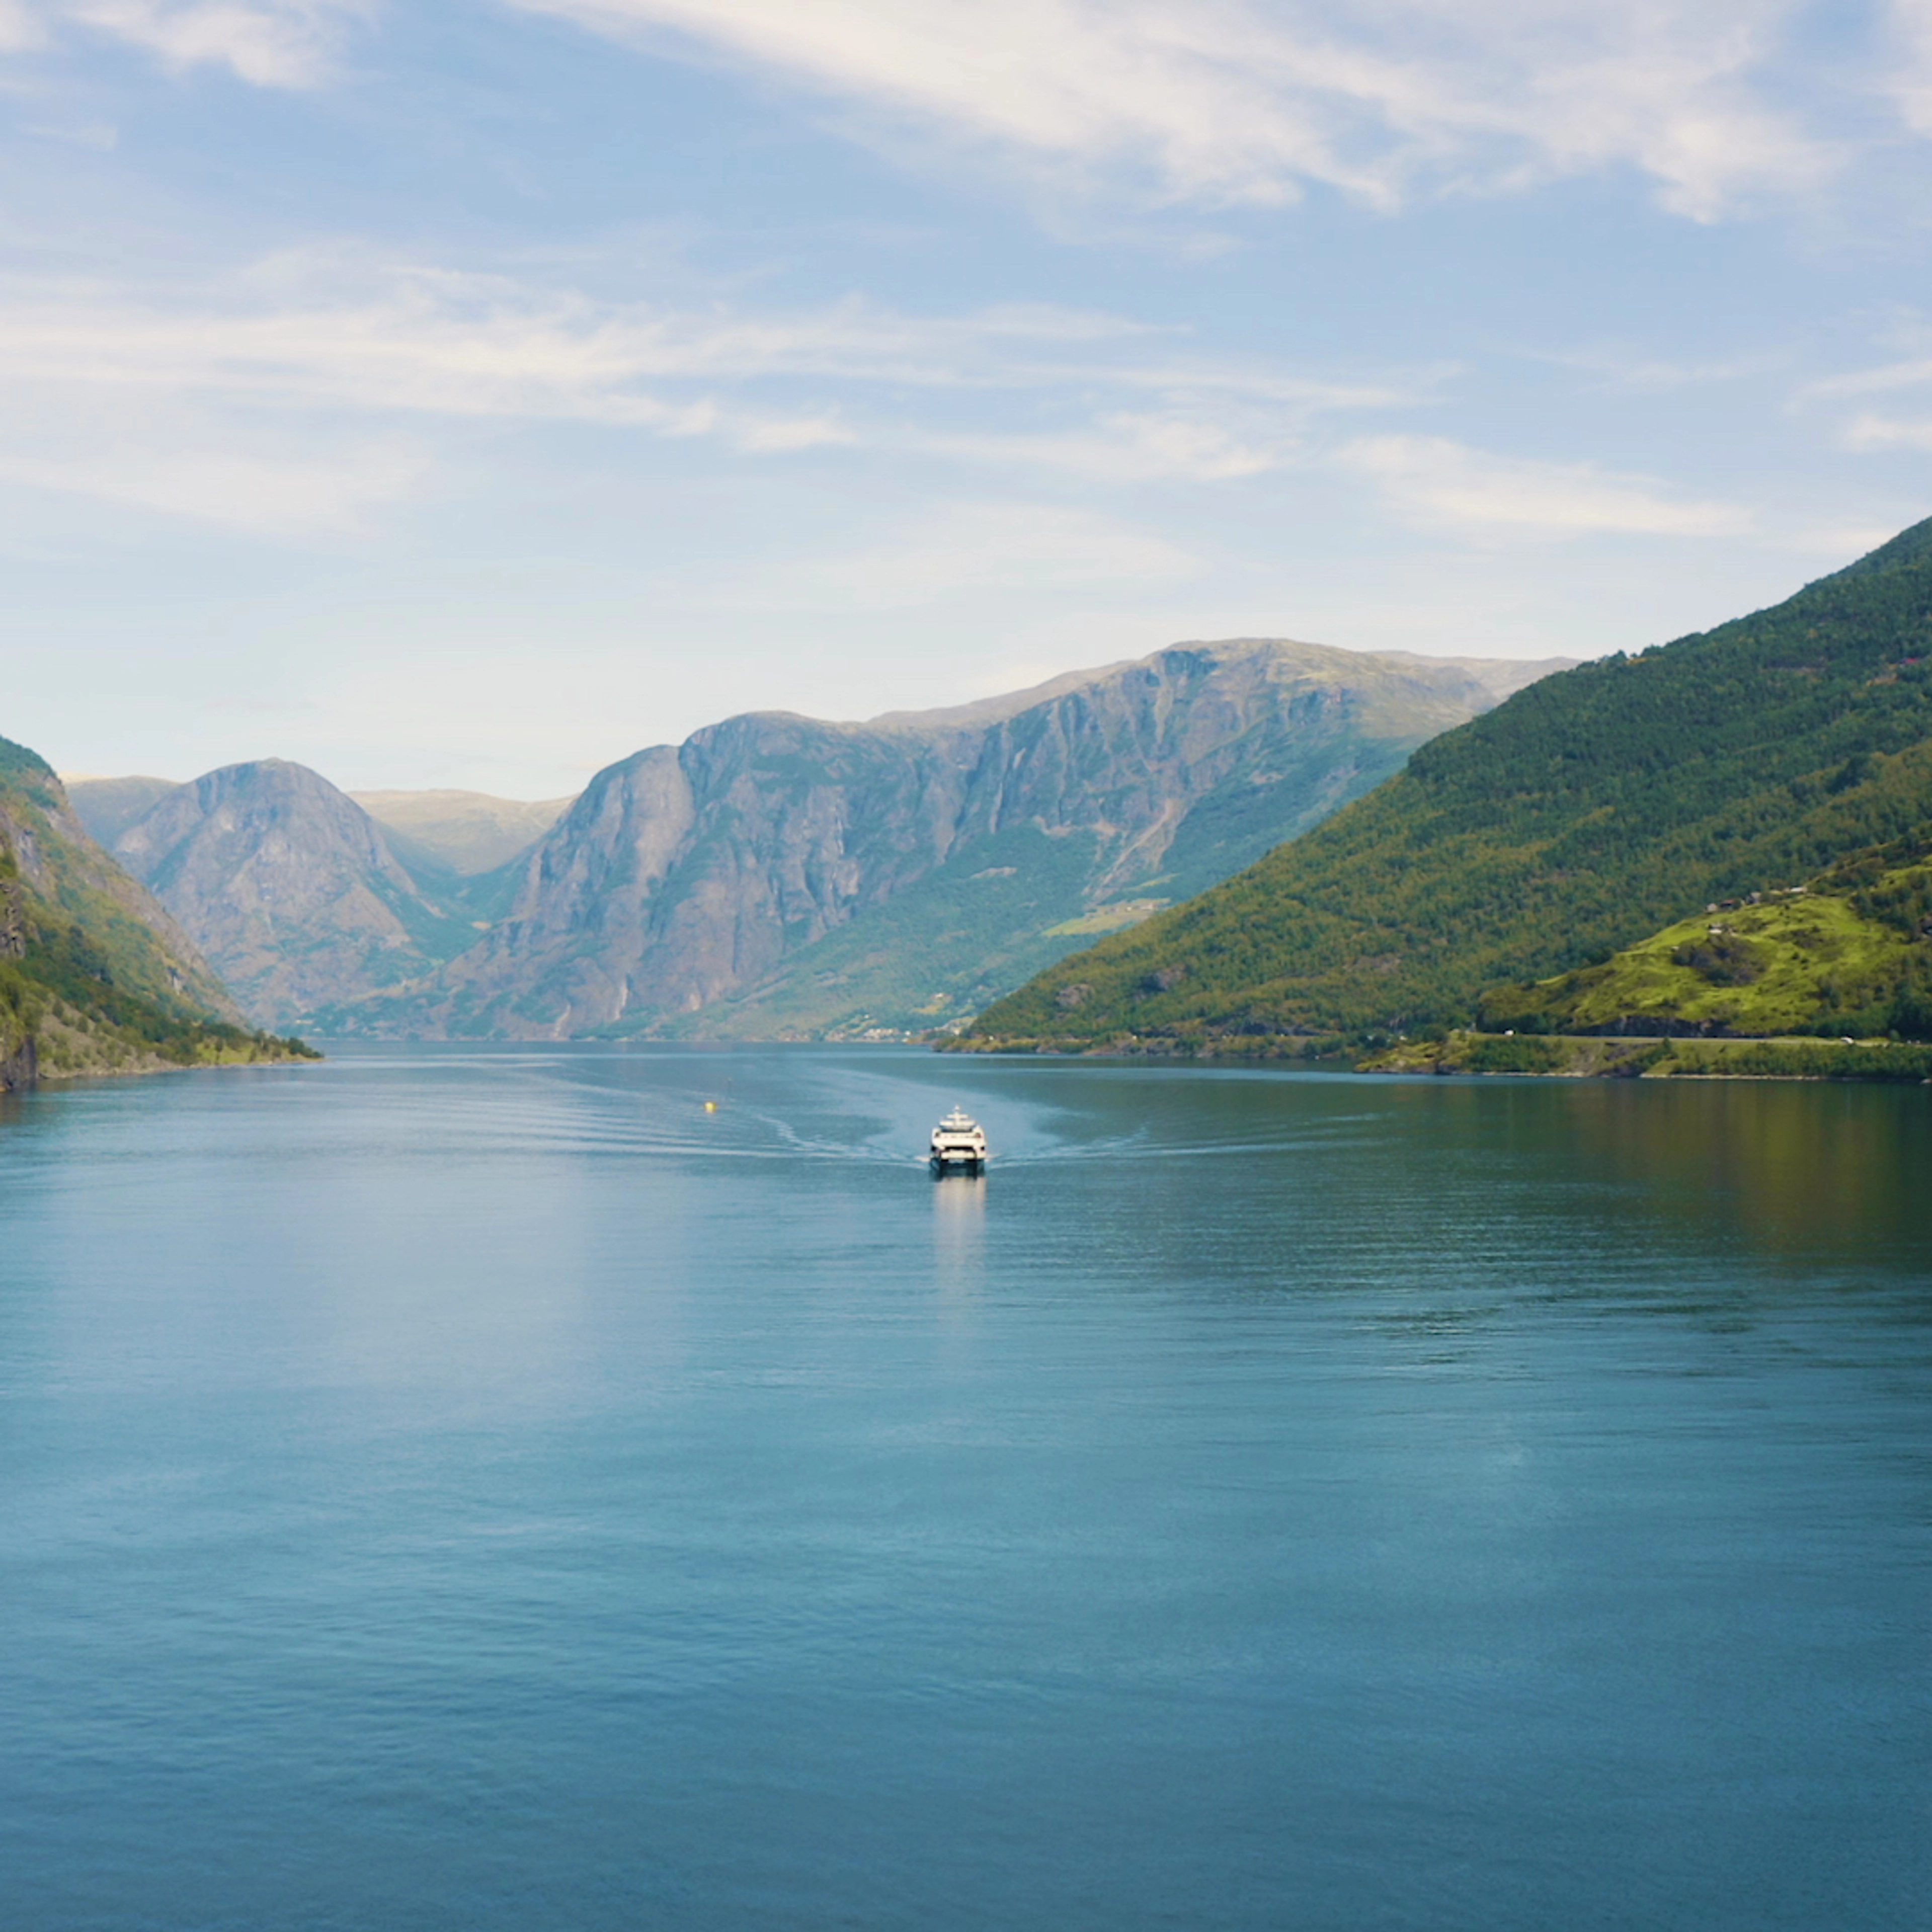 Express boat on the Sognefjord - Sognefjord in a nutshell, Norway